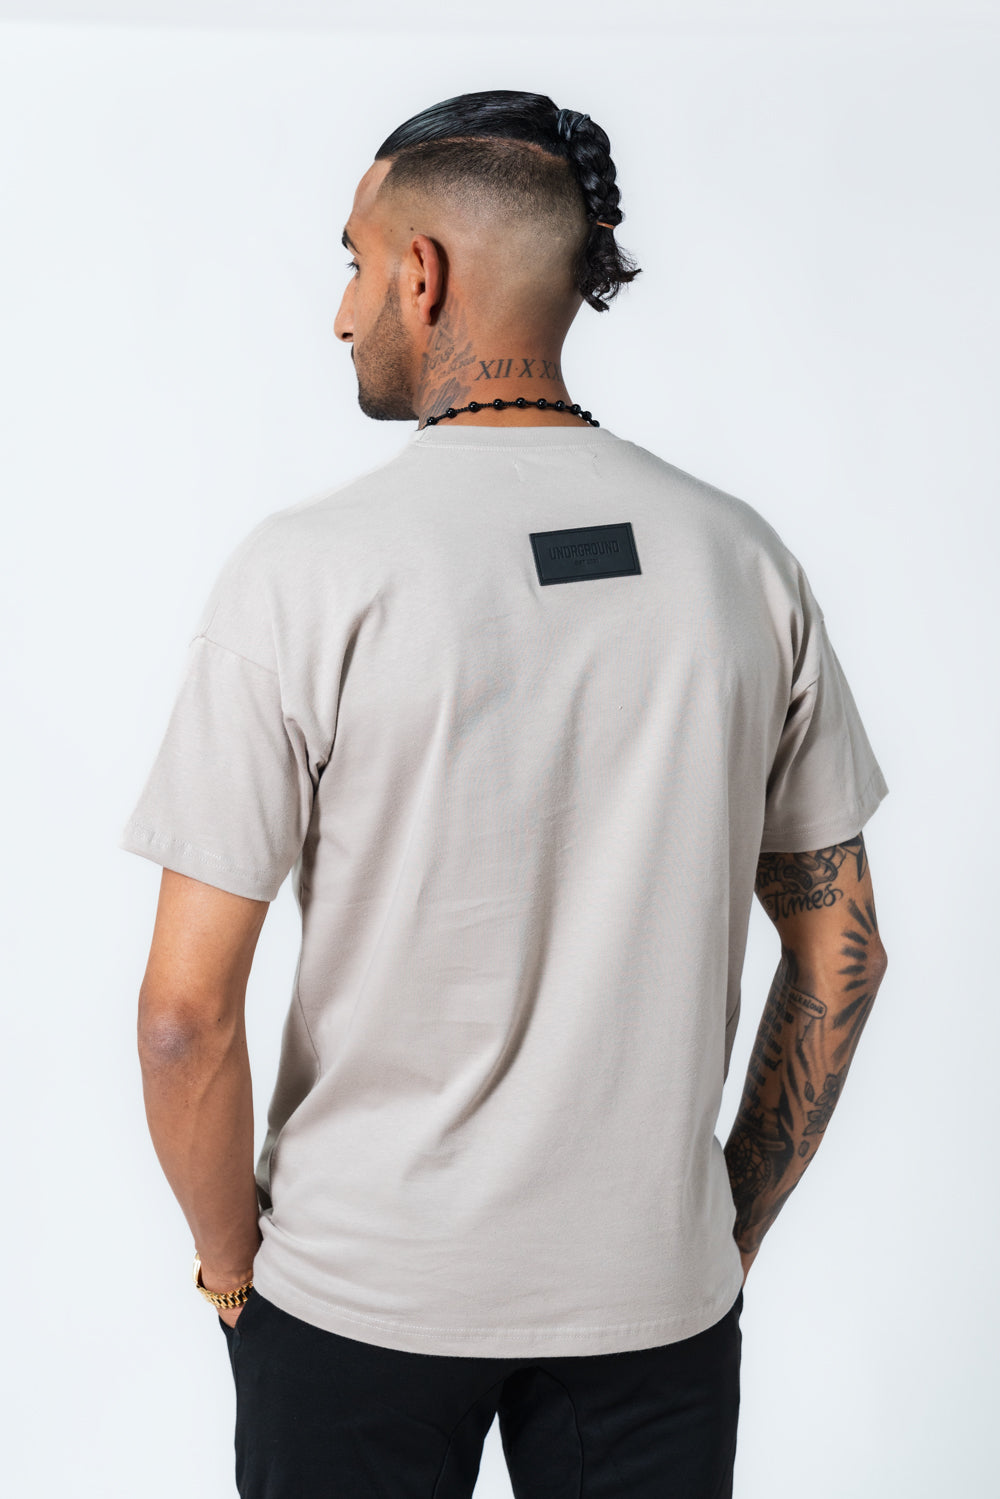 Taupe/Blk Leather Patch Tee